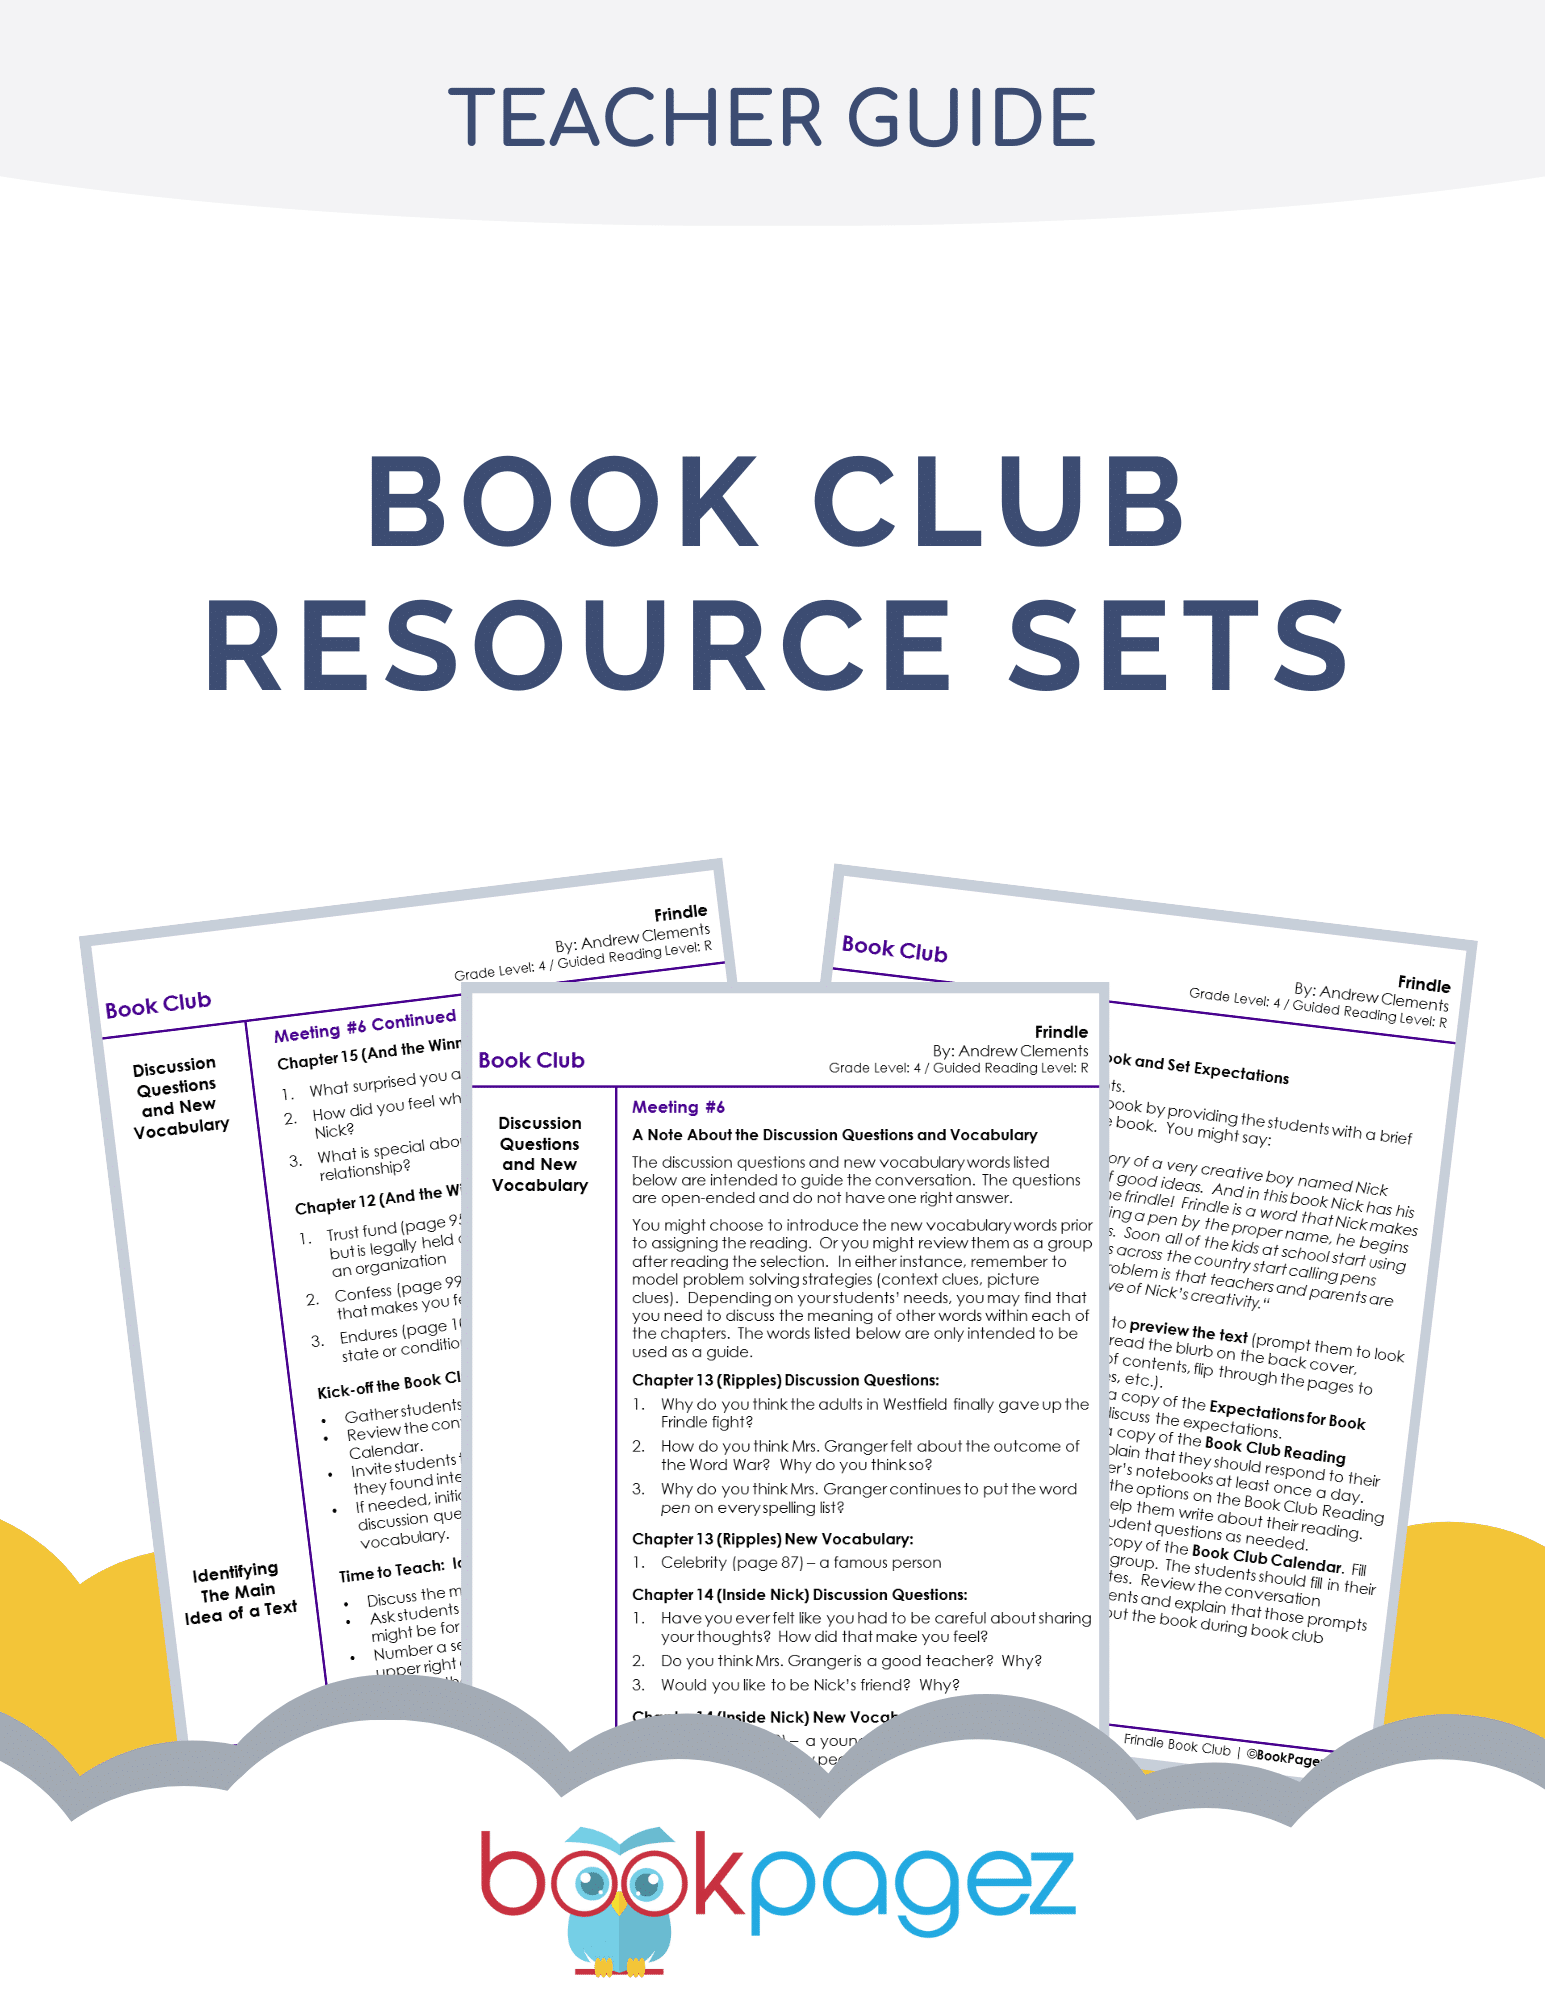 Cover for the Book Club Resources Teacher Guide